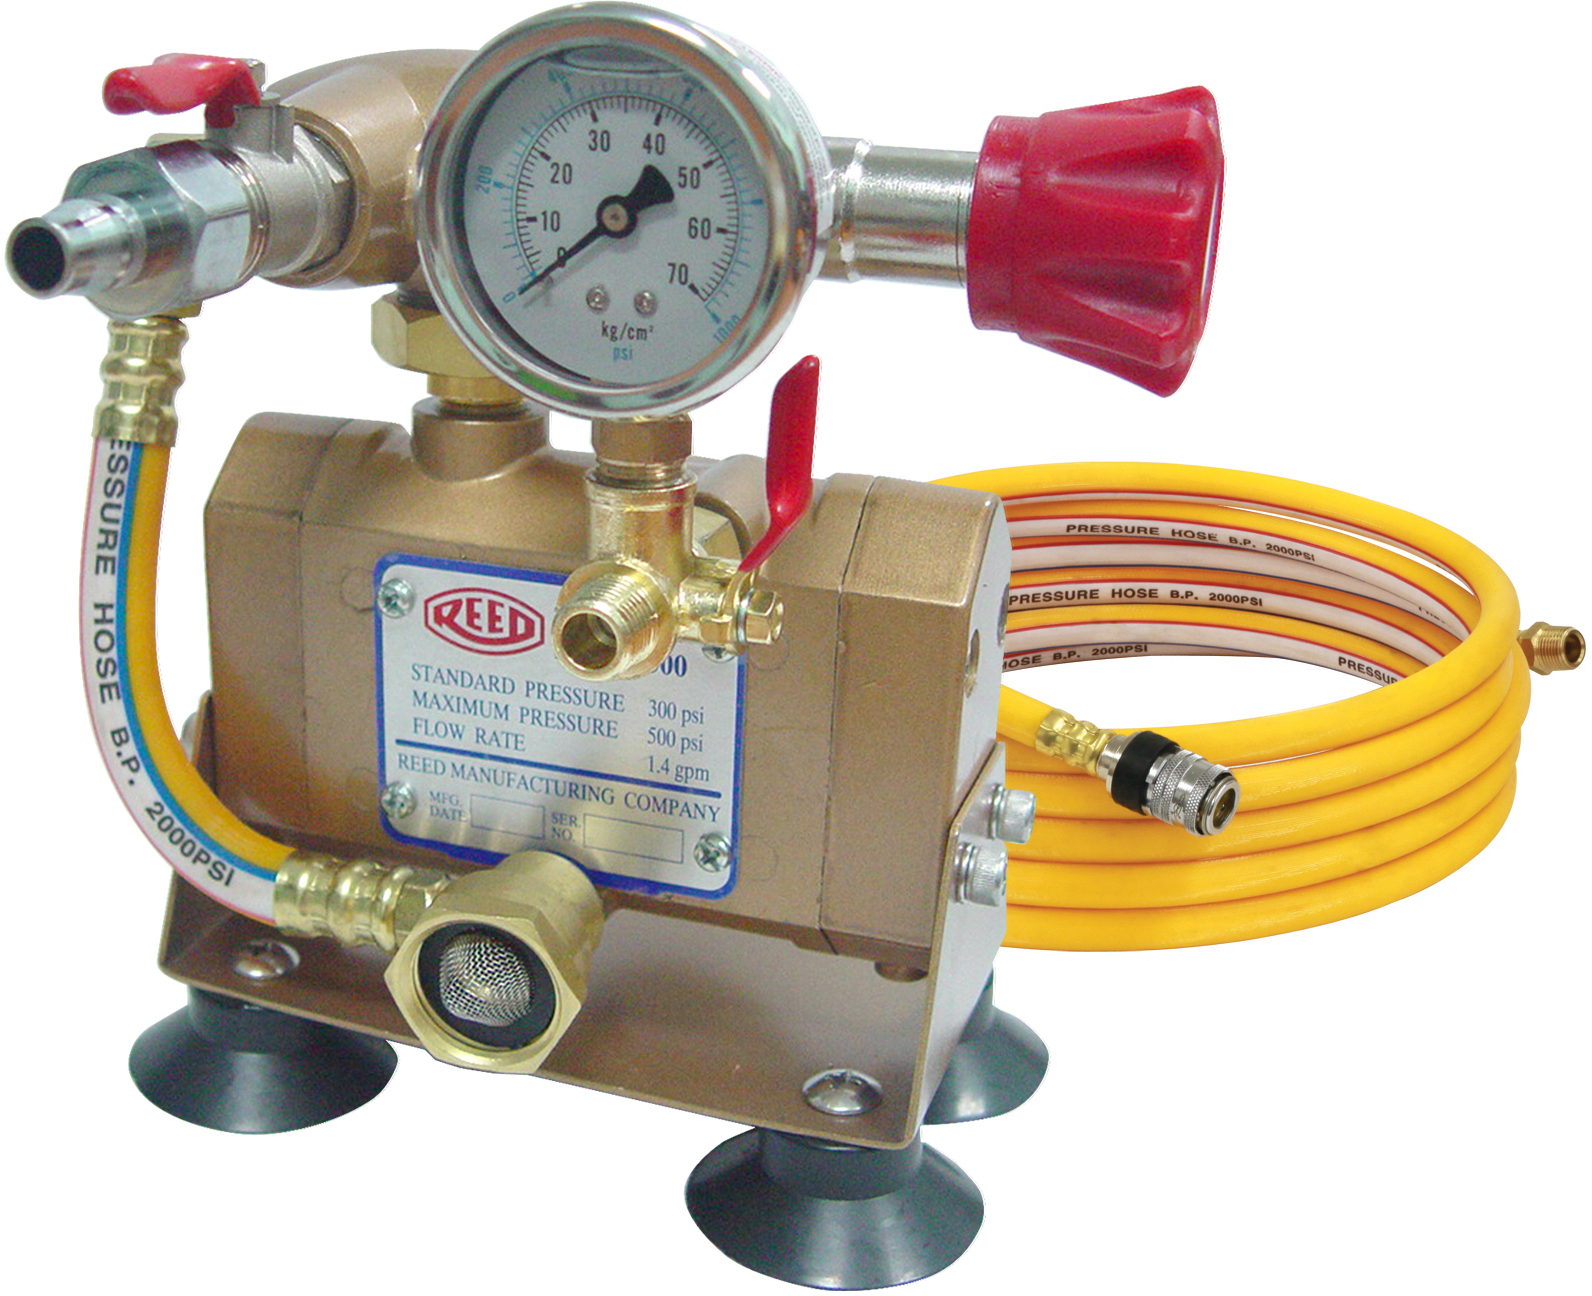 REED 08177 DPHT500 Drill-Powered Hydrostatic Test Pump